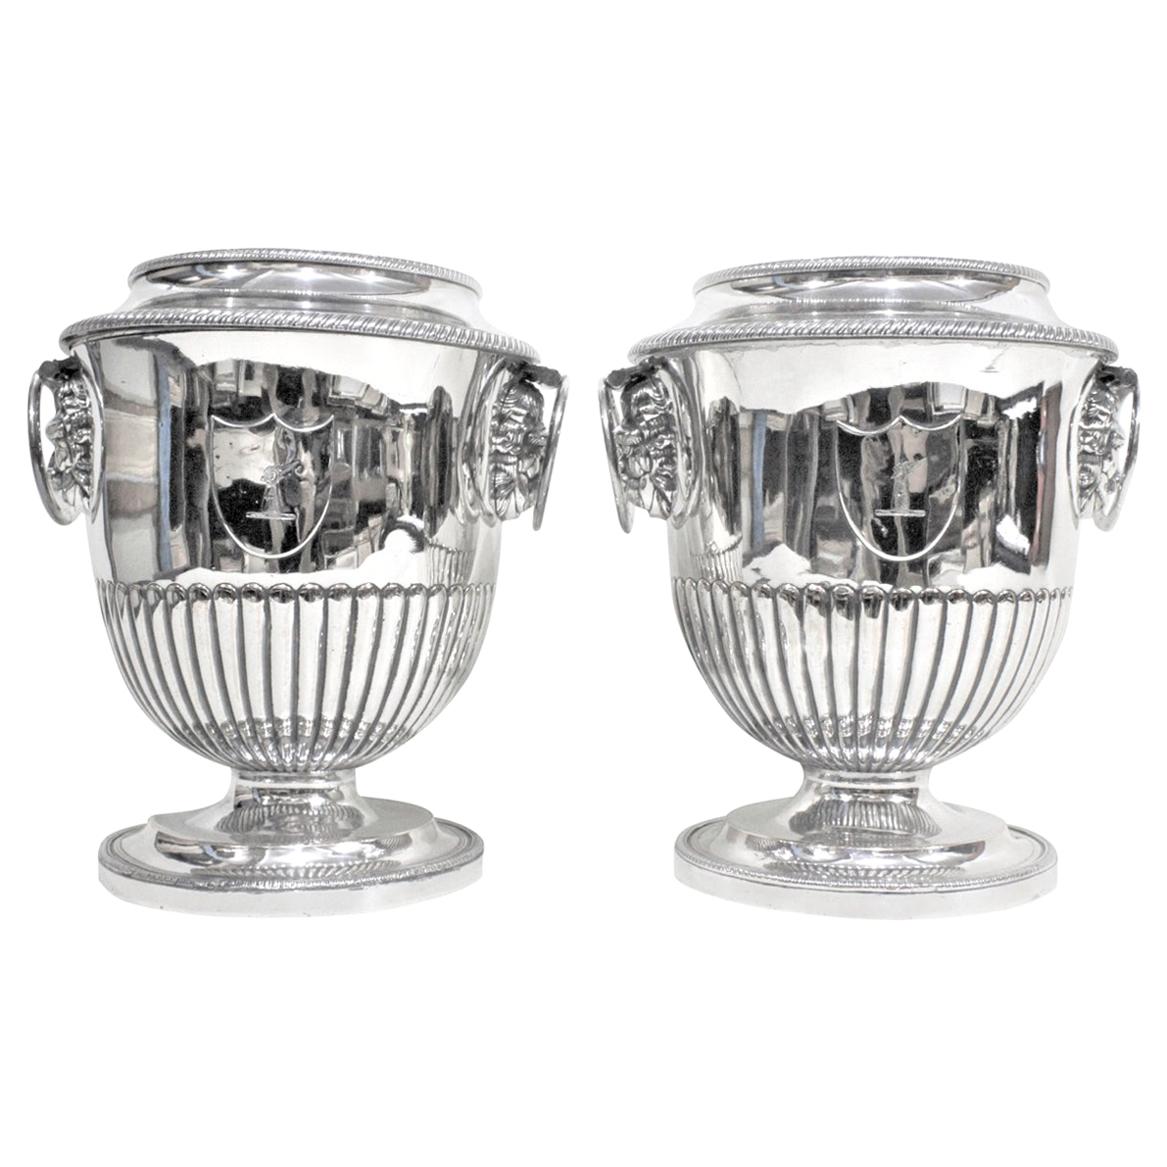 Pair of Antique Sheffield Regency Style Silver Plated Wine Coolers